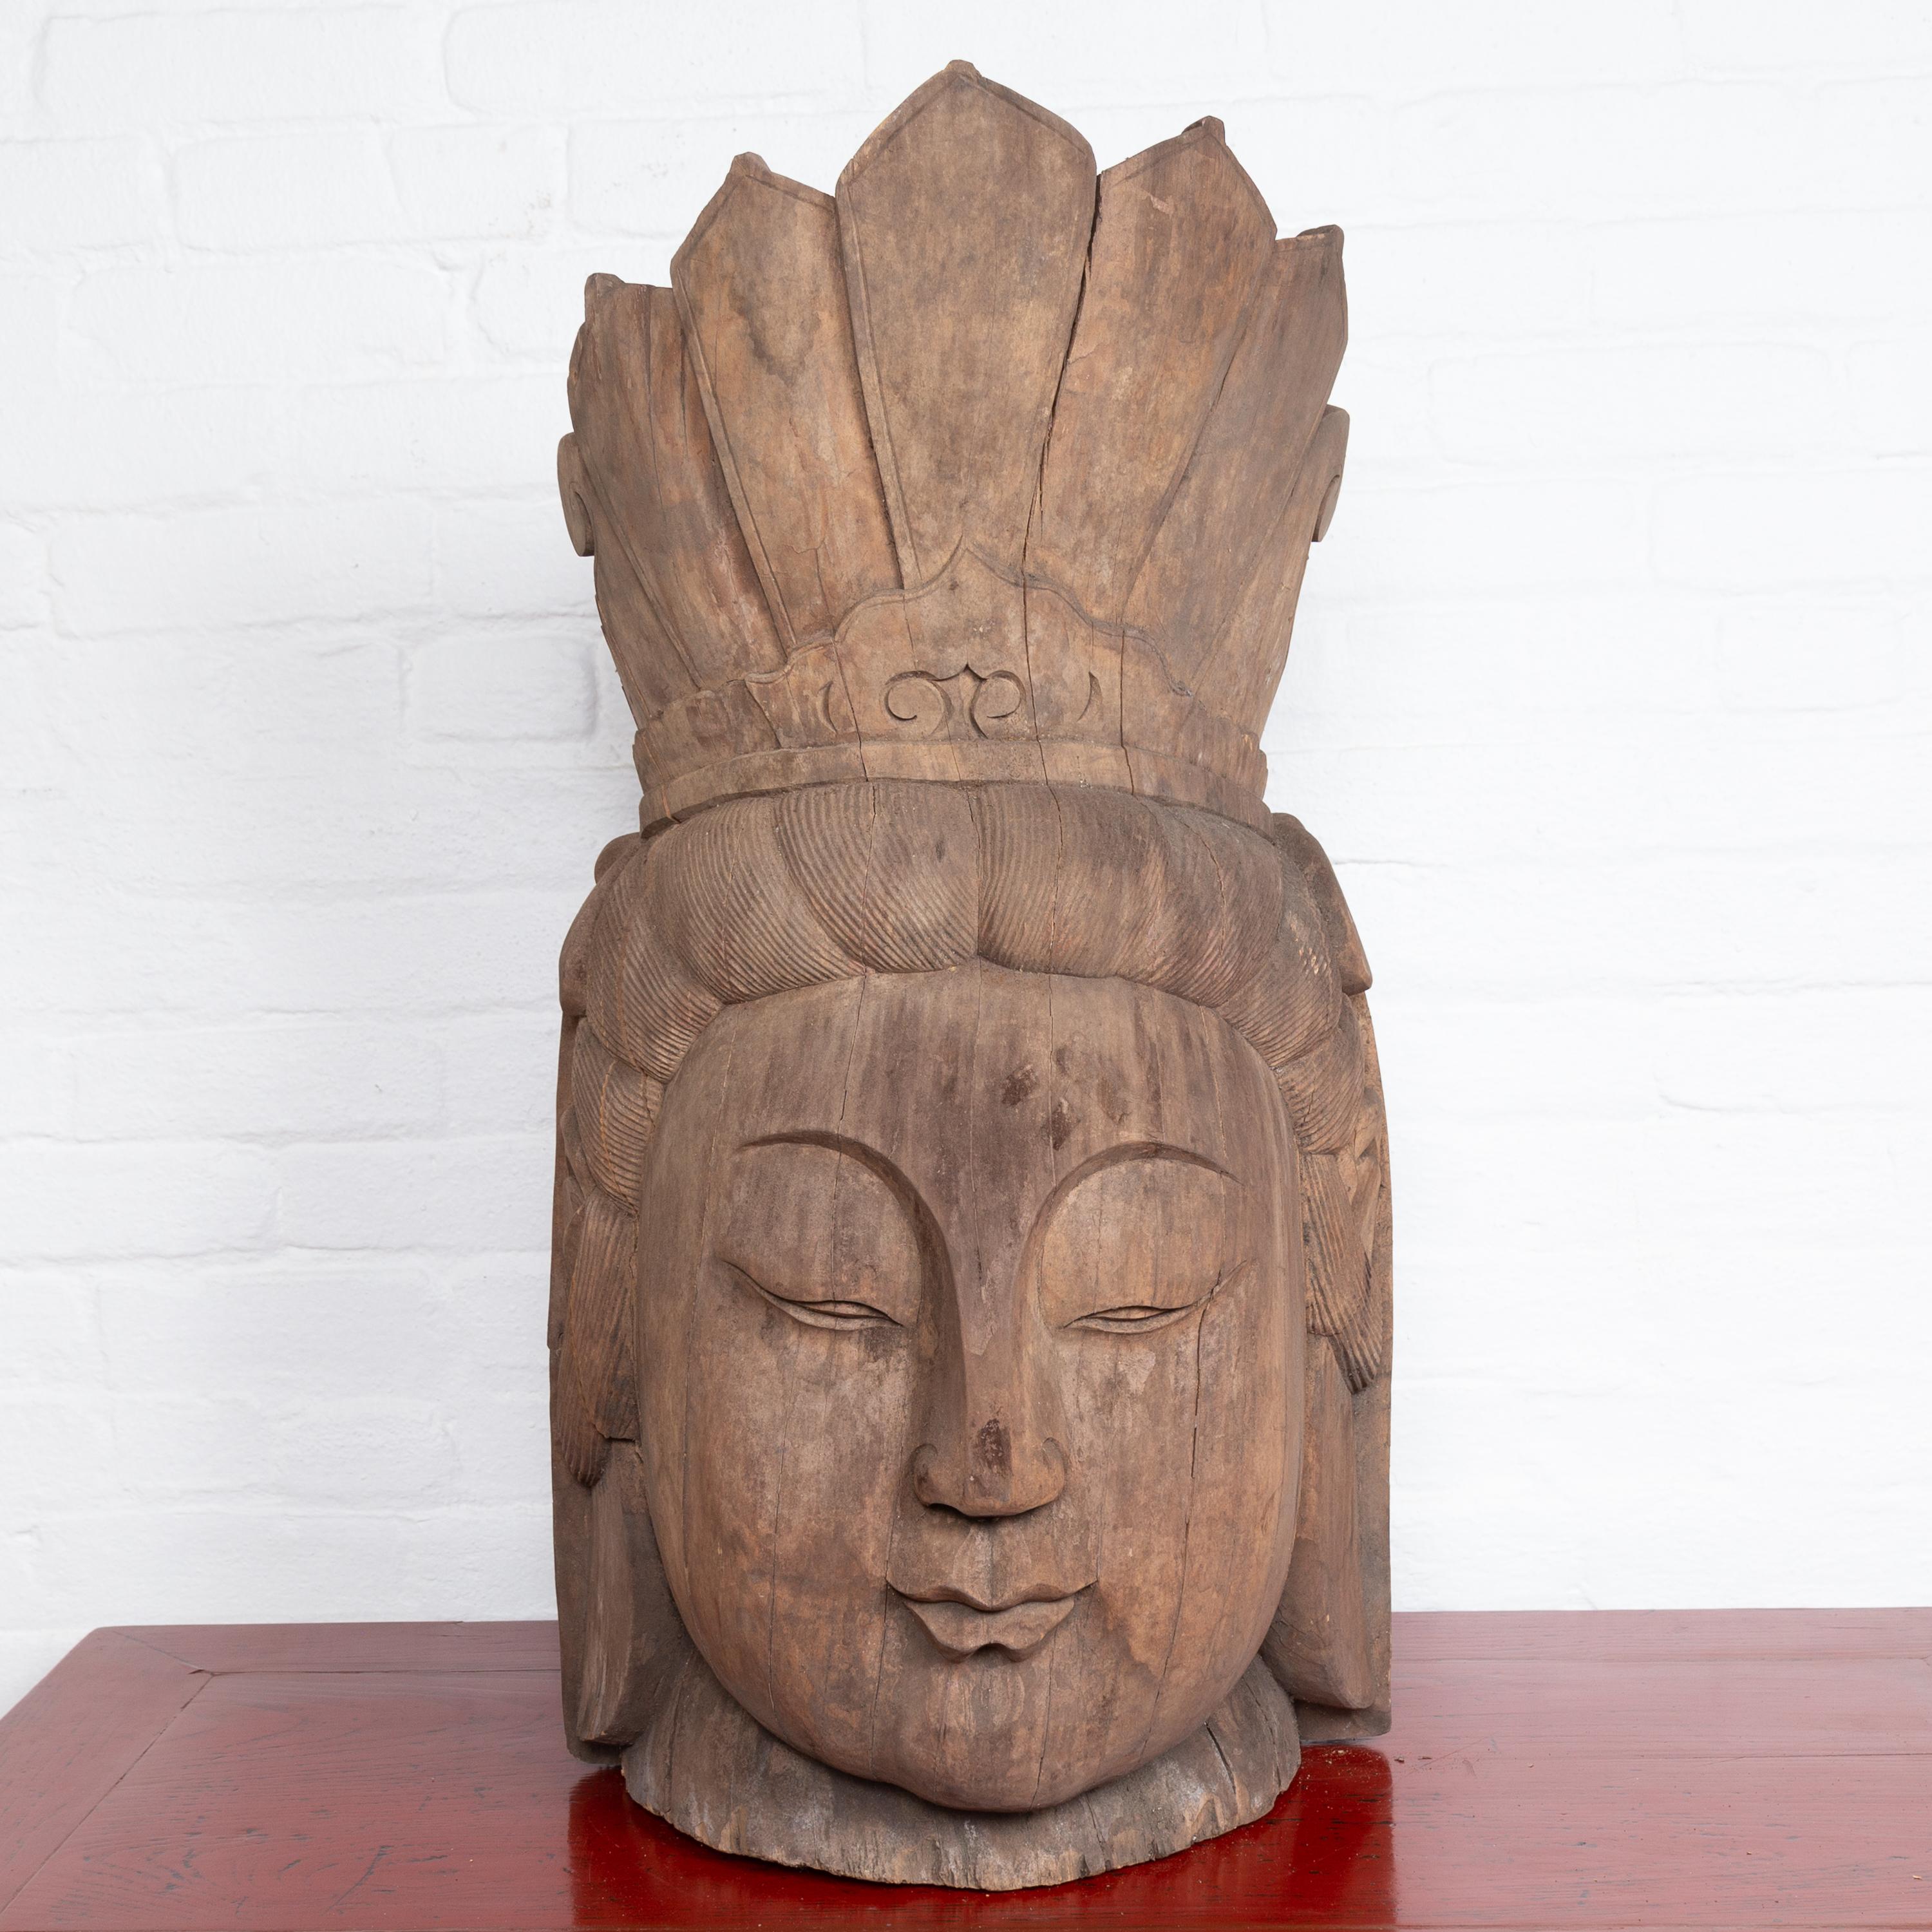 A large vintage Thai carved Chinese design wooden head sculpture depicting Guanyin, the bodhisattva of compassion. Found in Thailand and topped with a tall crown, this Chinese style wooden depiction of Guanyin captivates us with its calm presence.